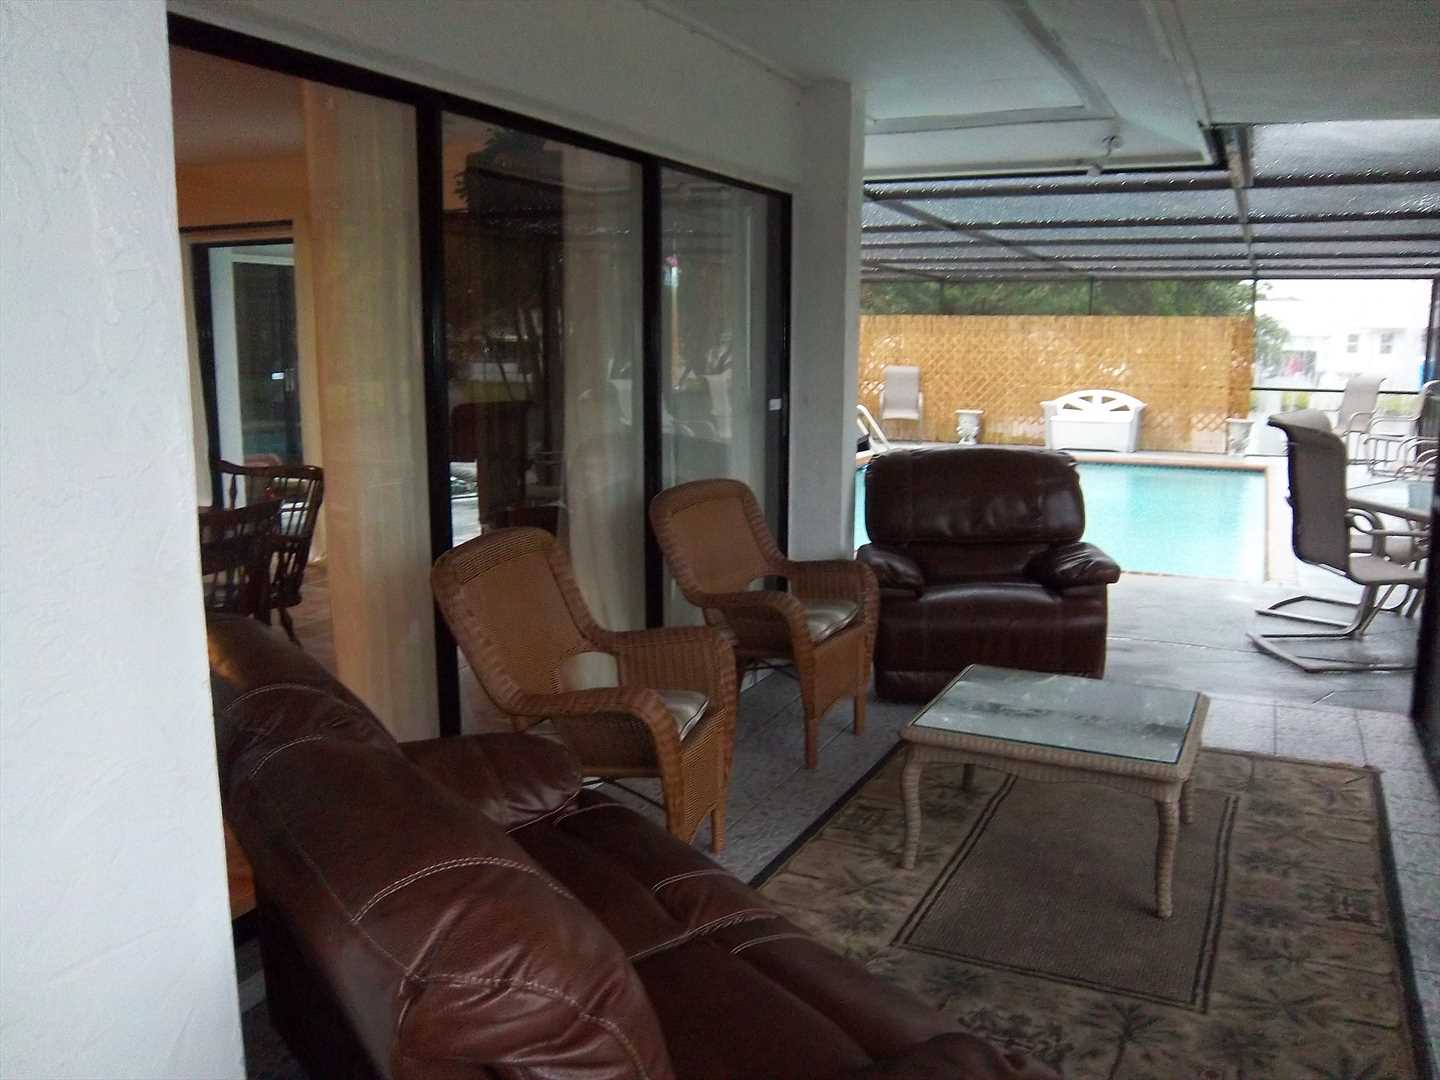 Laze in one of the leather recliners on the covered lanai wh